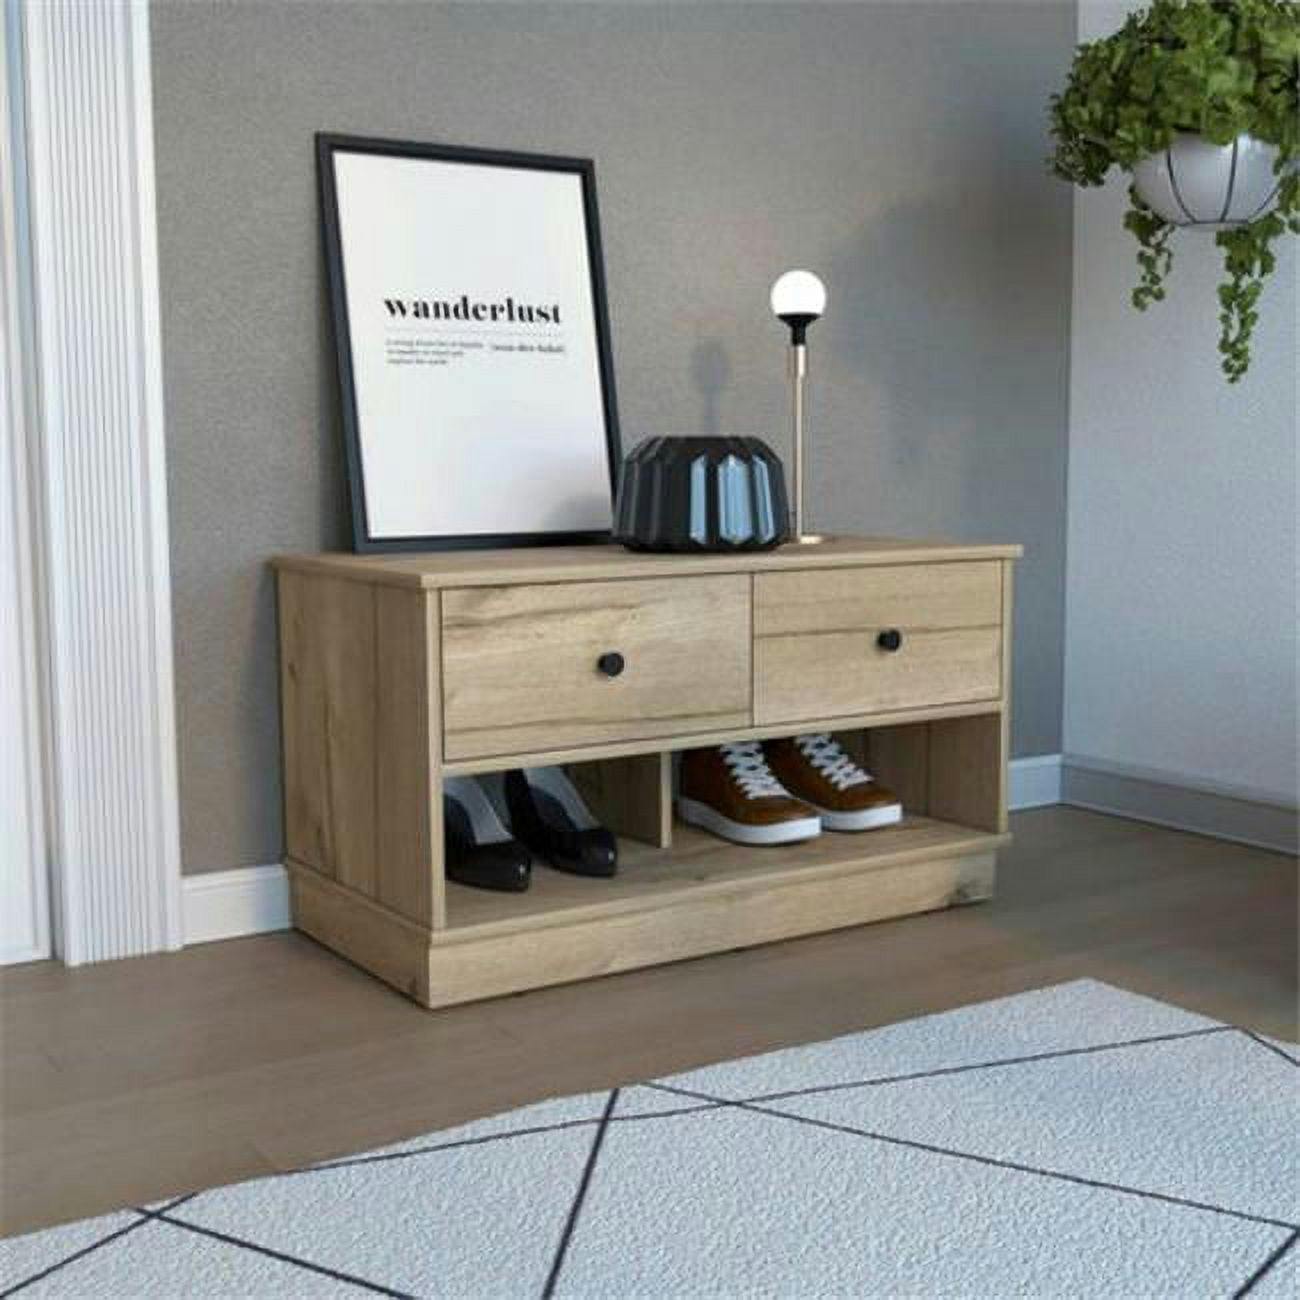 Uranus Light Oak Particleboard Storage Bench with Drawers